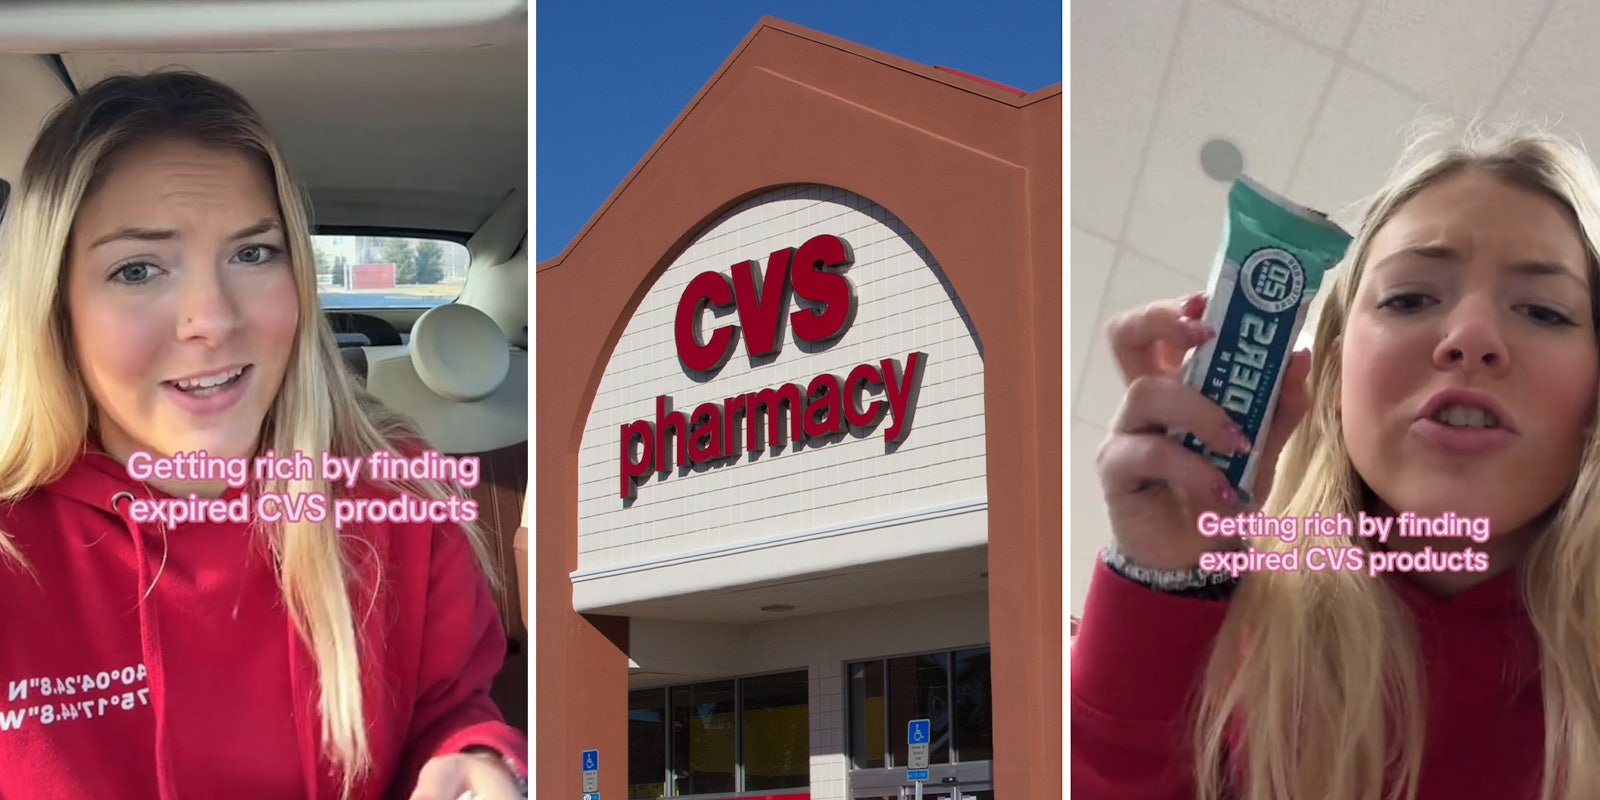 Customer shows how to get ‘CVS Rich’ by finding hidden deals in the store